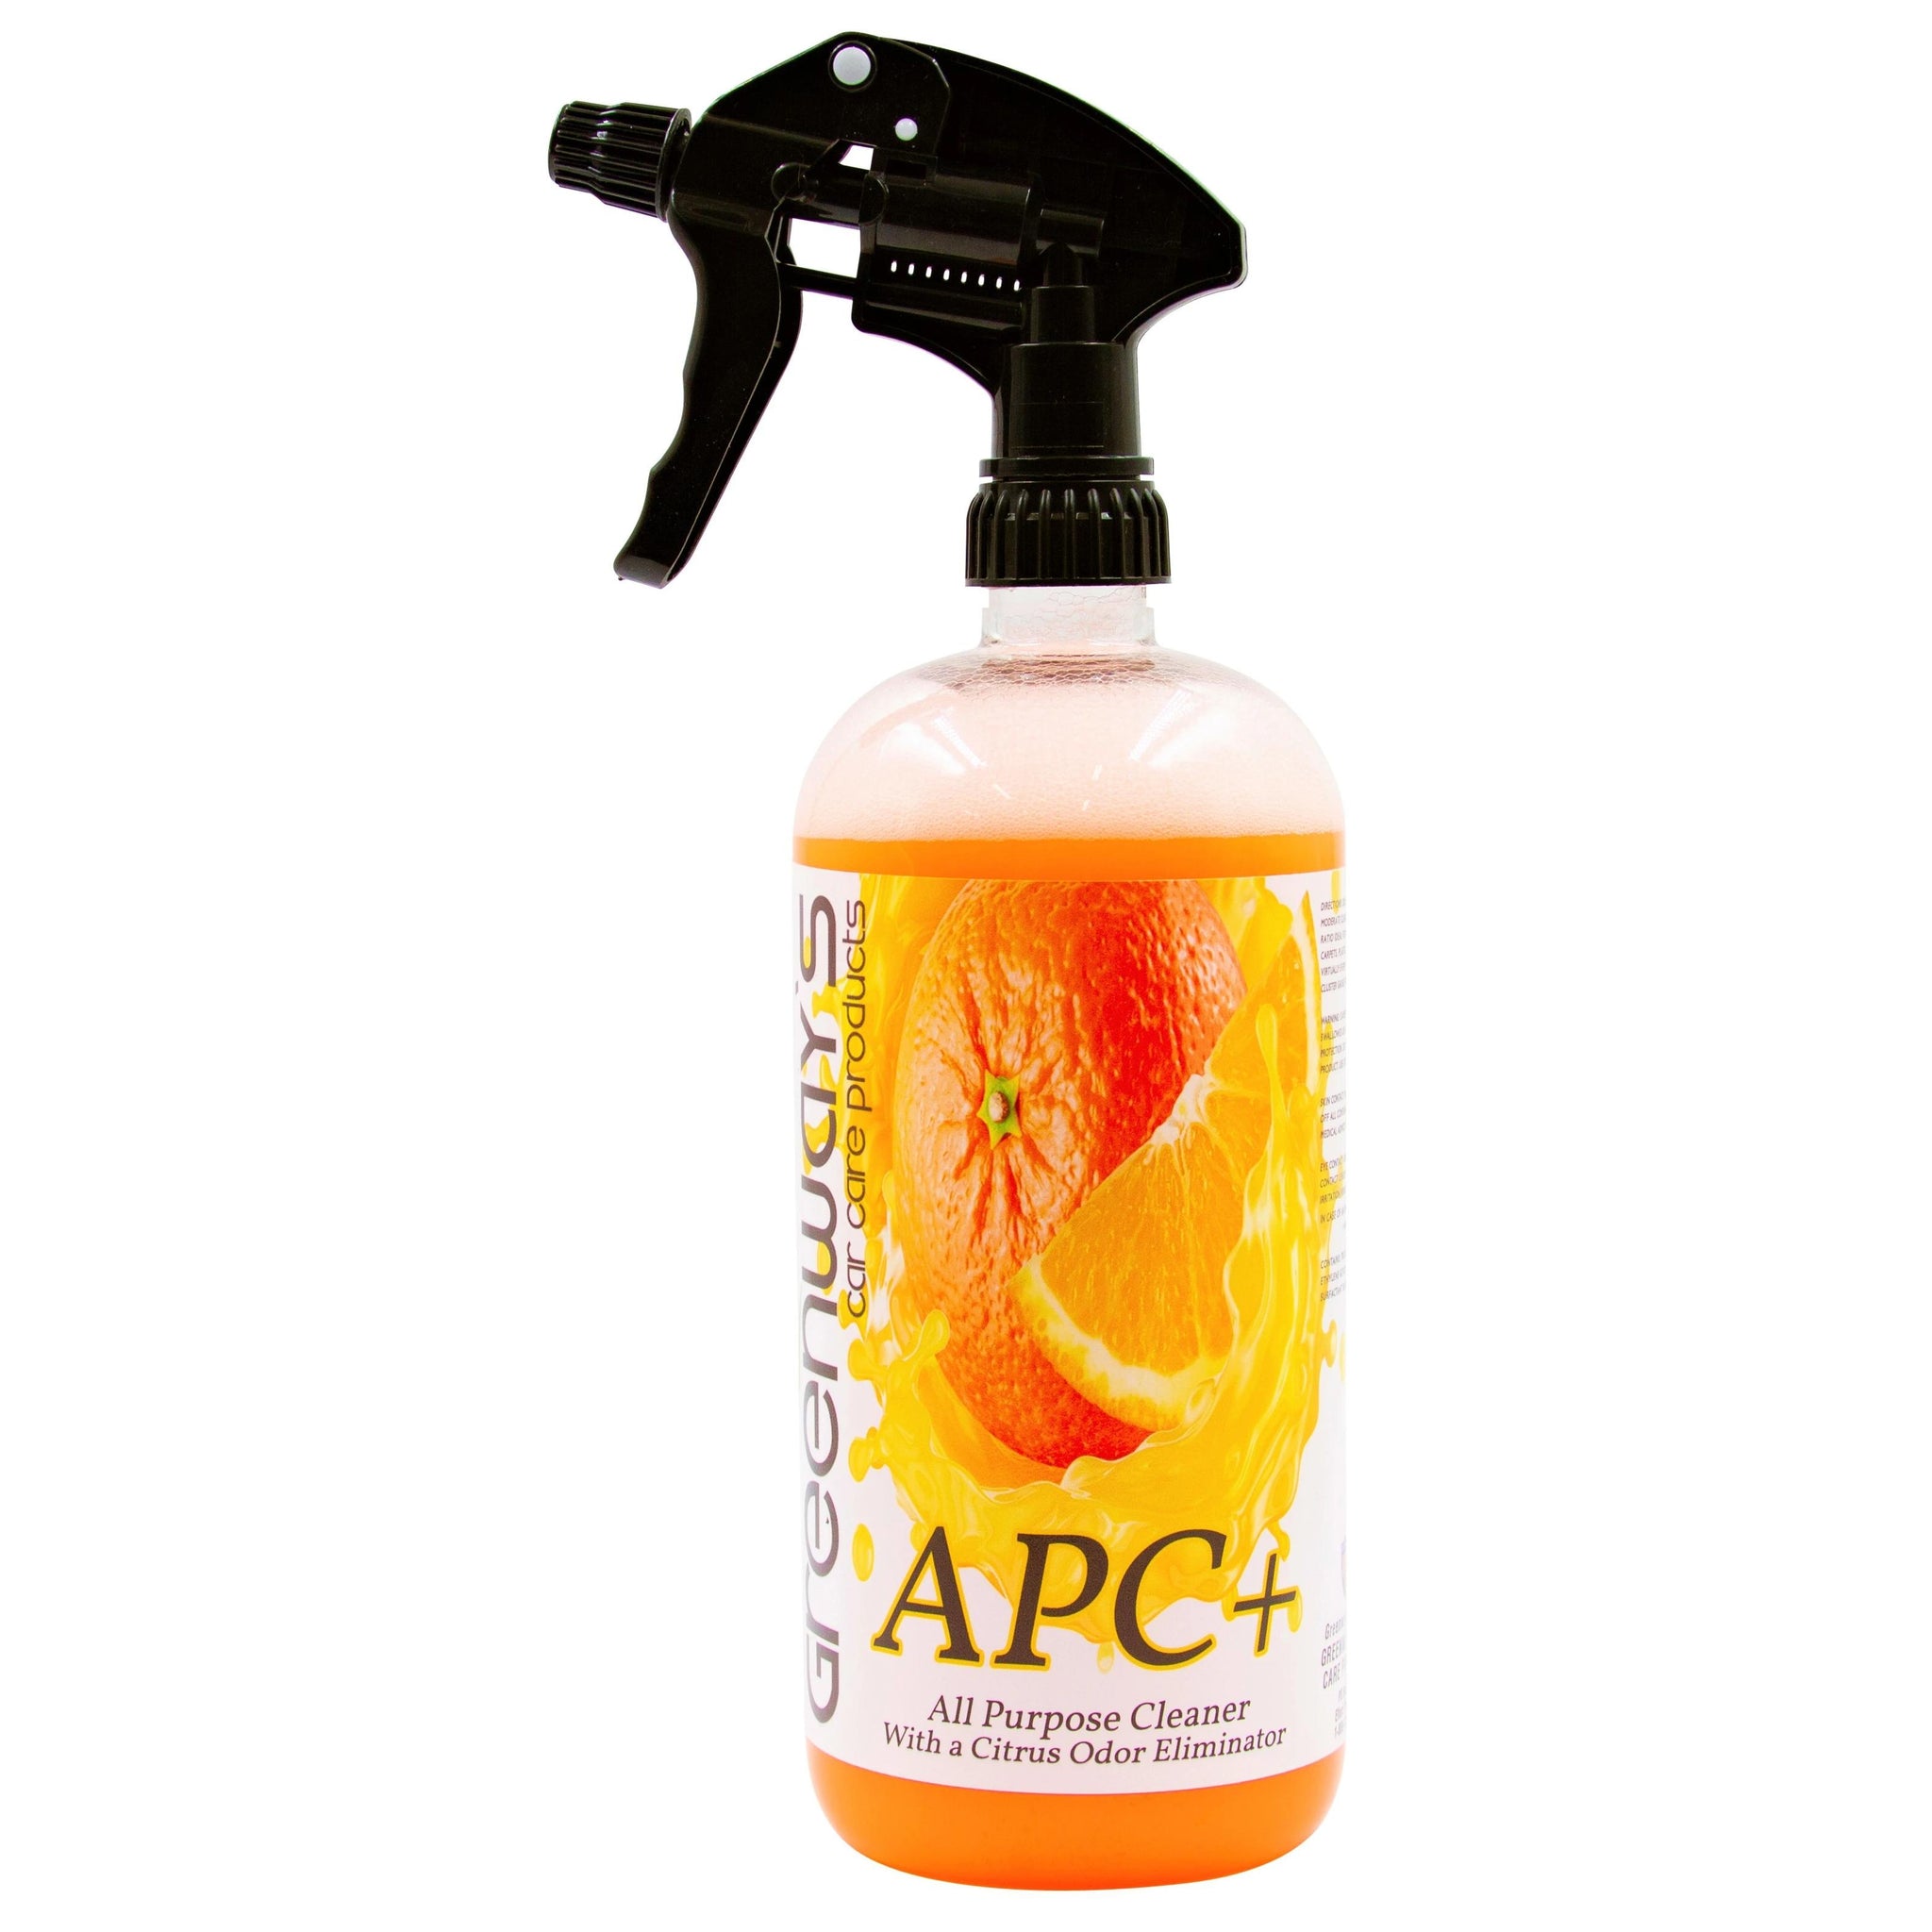 The best all-purpose (APC) cleaners for your car